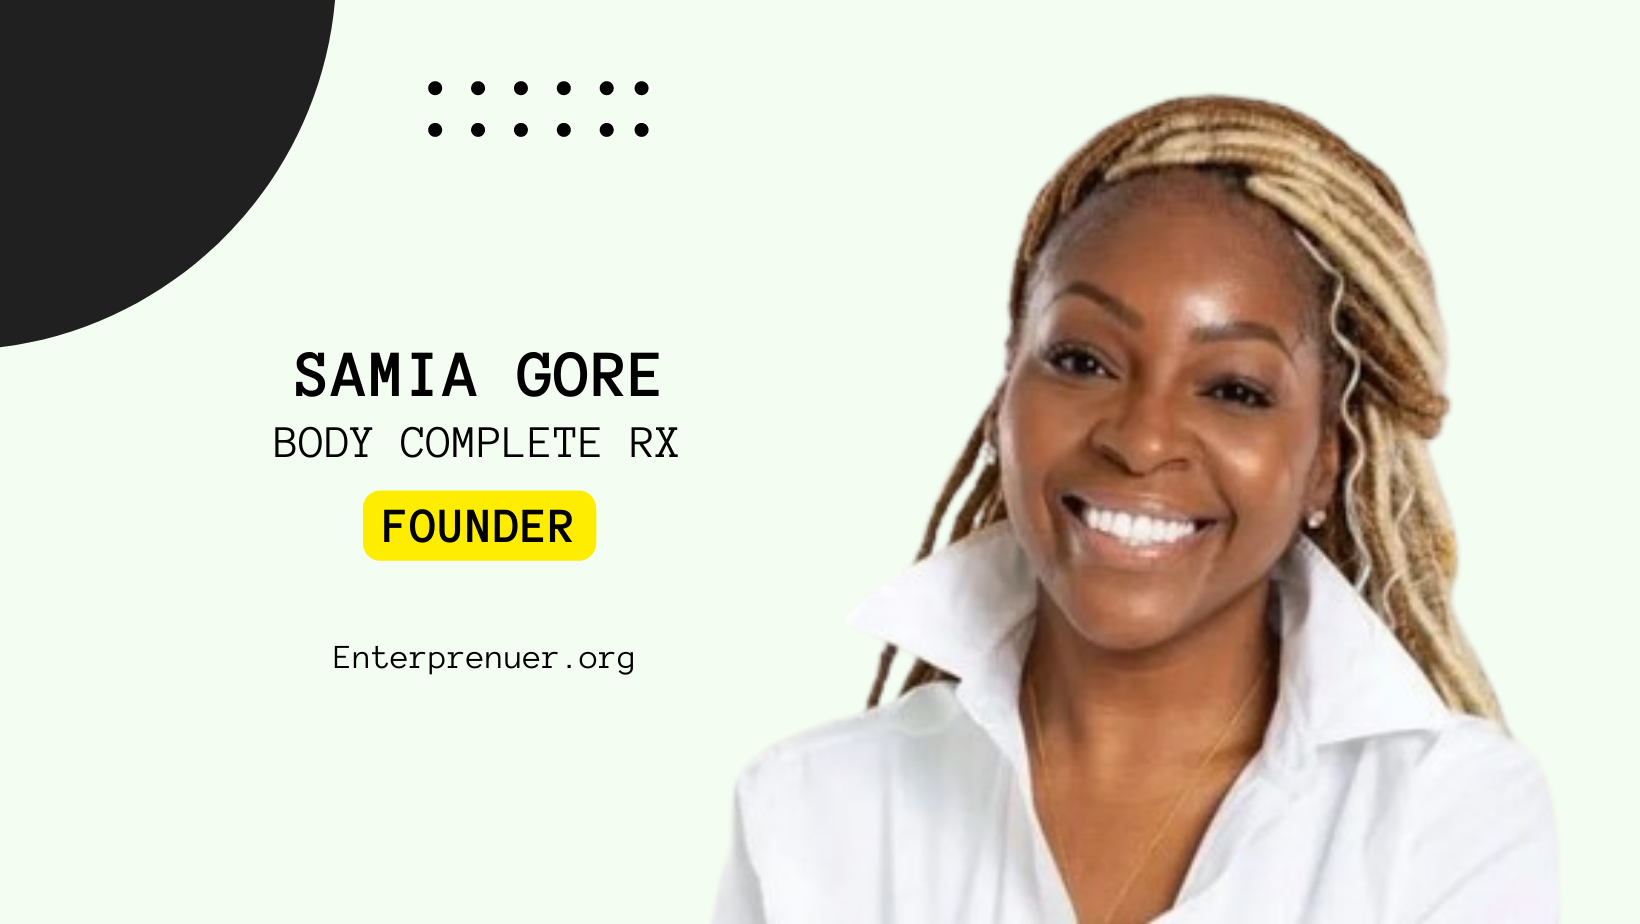 Meet Samia Gore Founder of Body Complete Rx